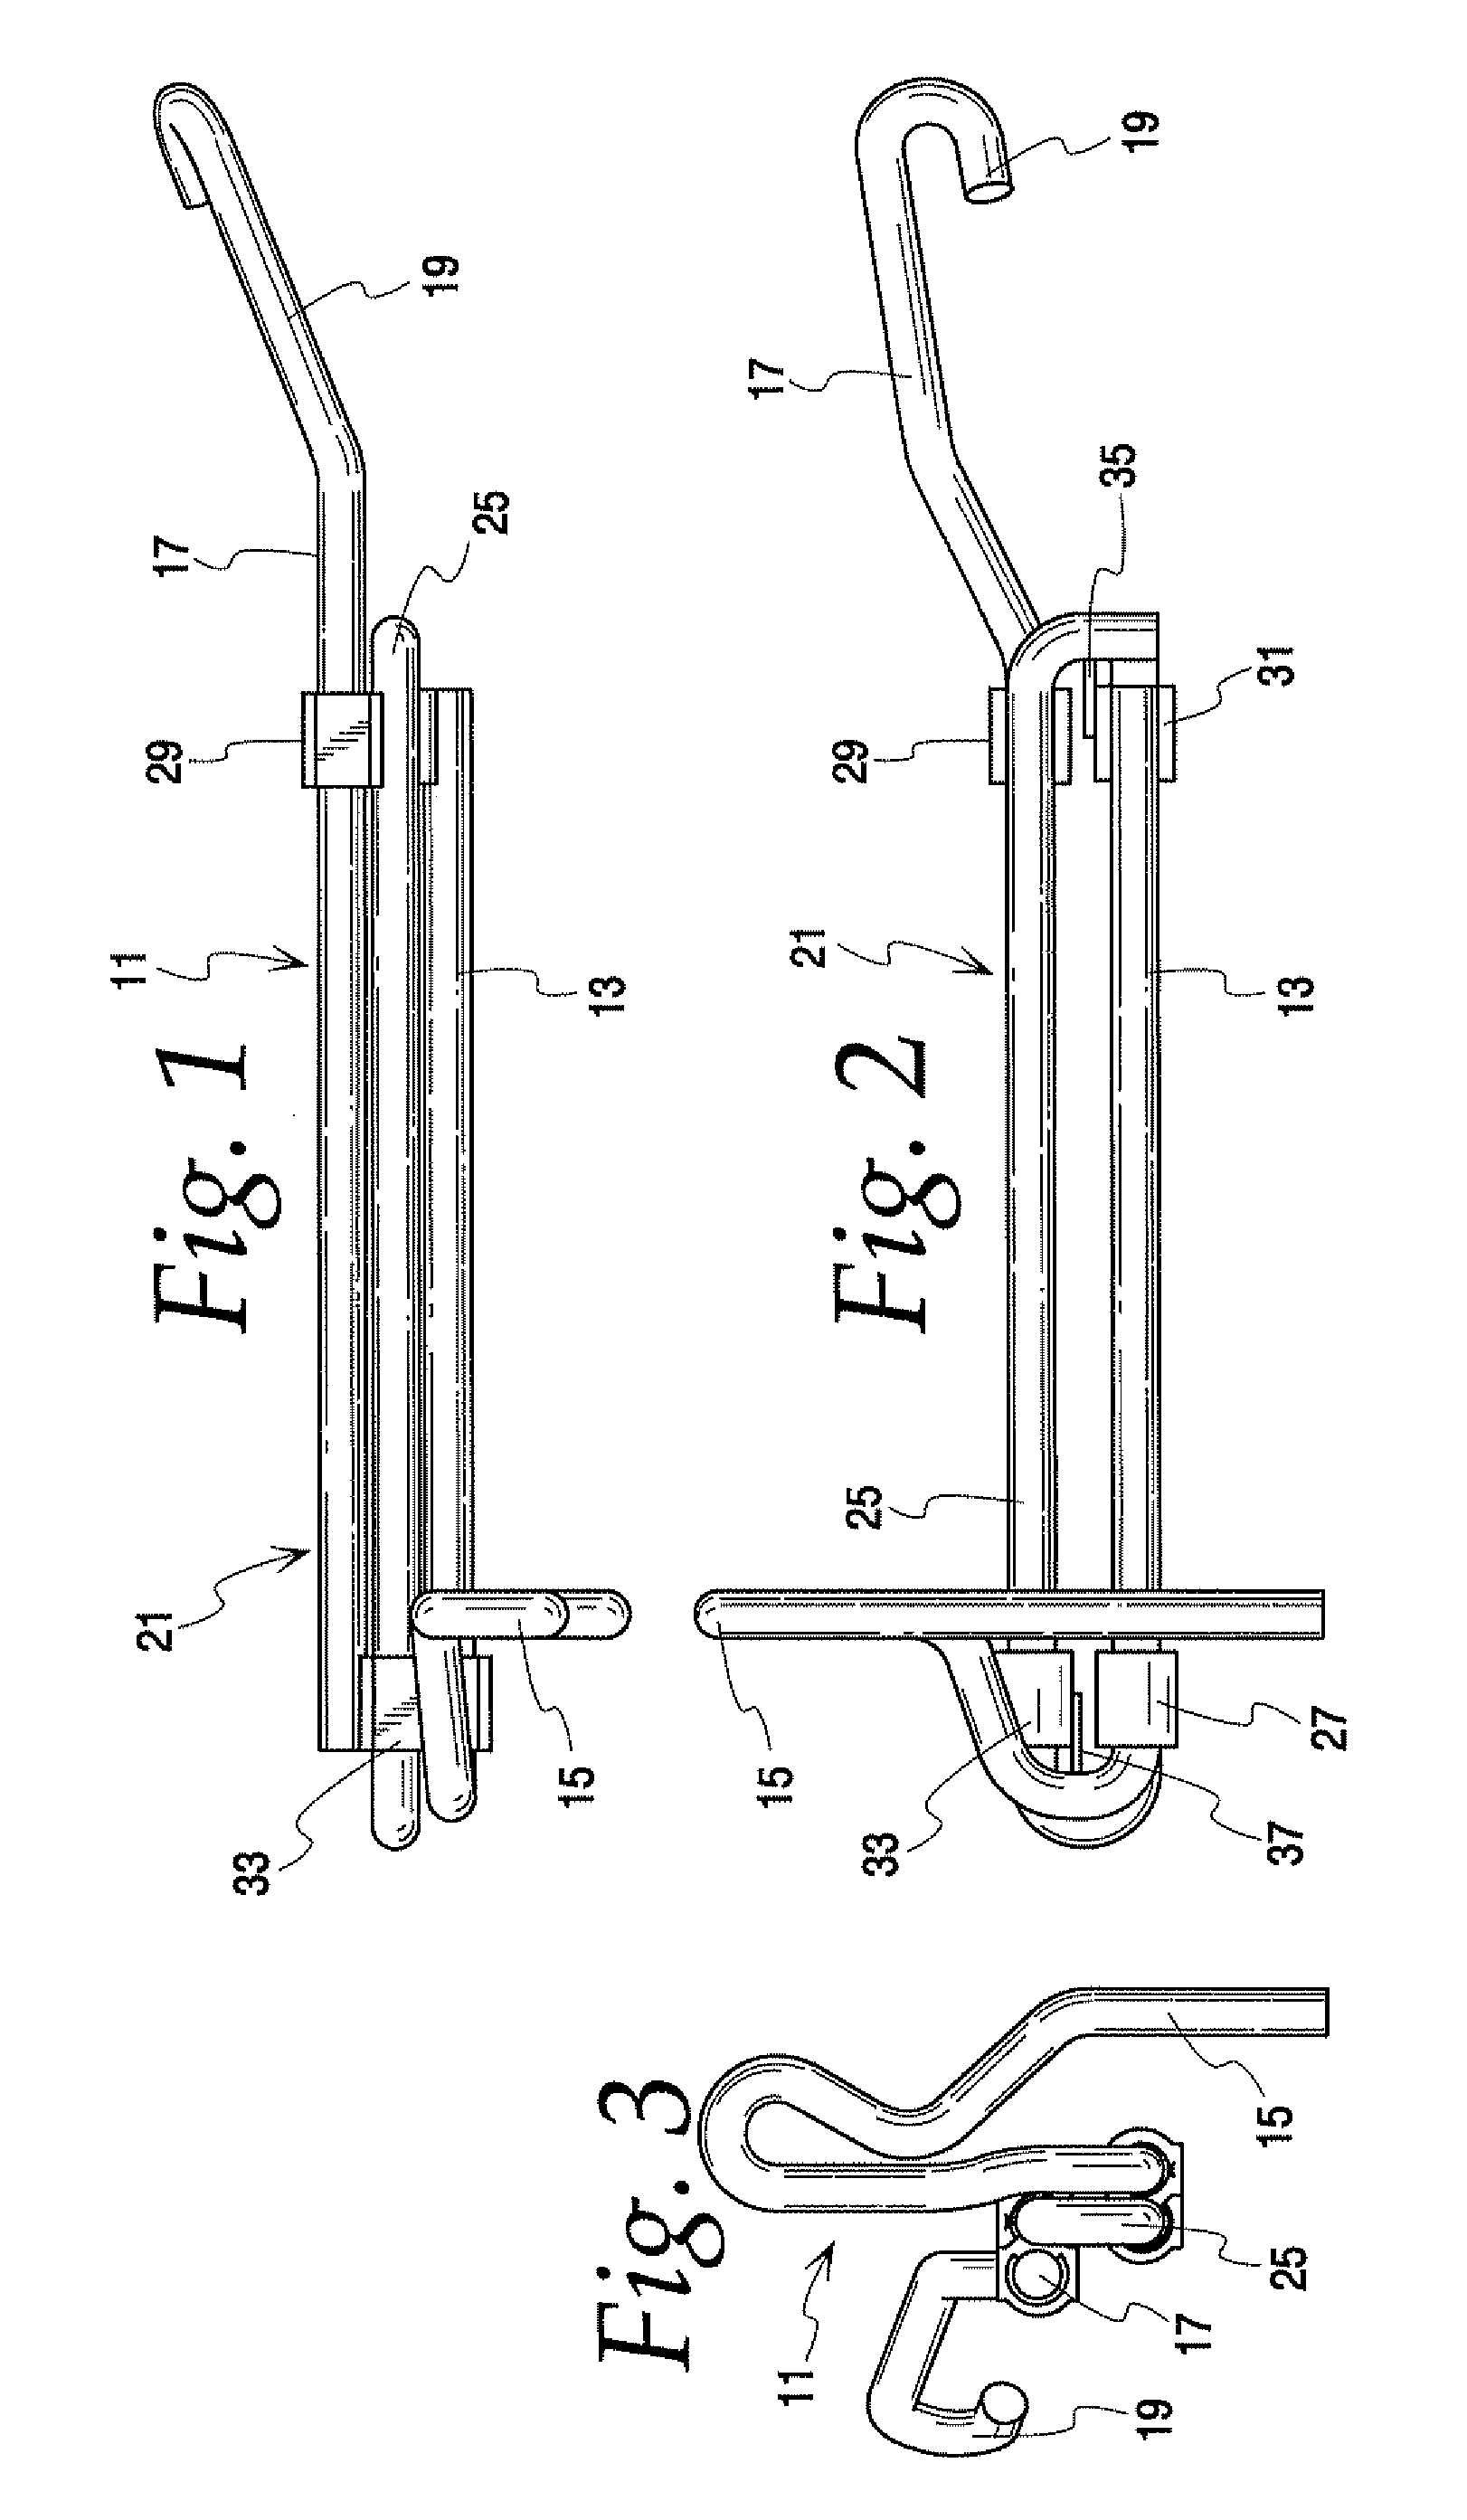 Telescoping, uncoupling lever and glide housings for a railroad car